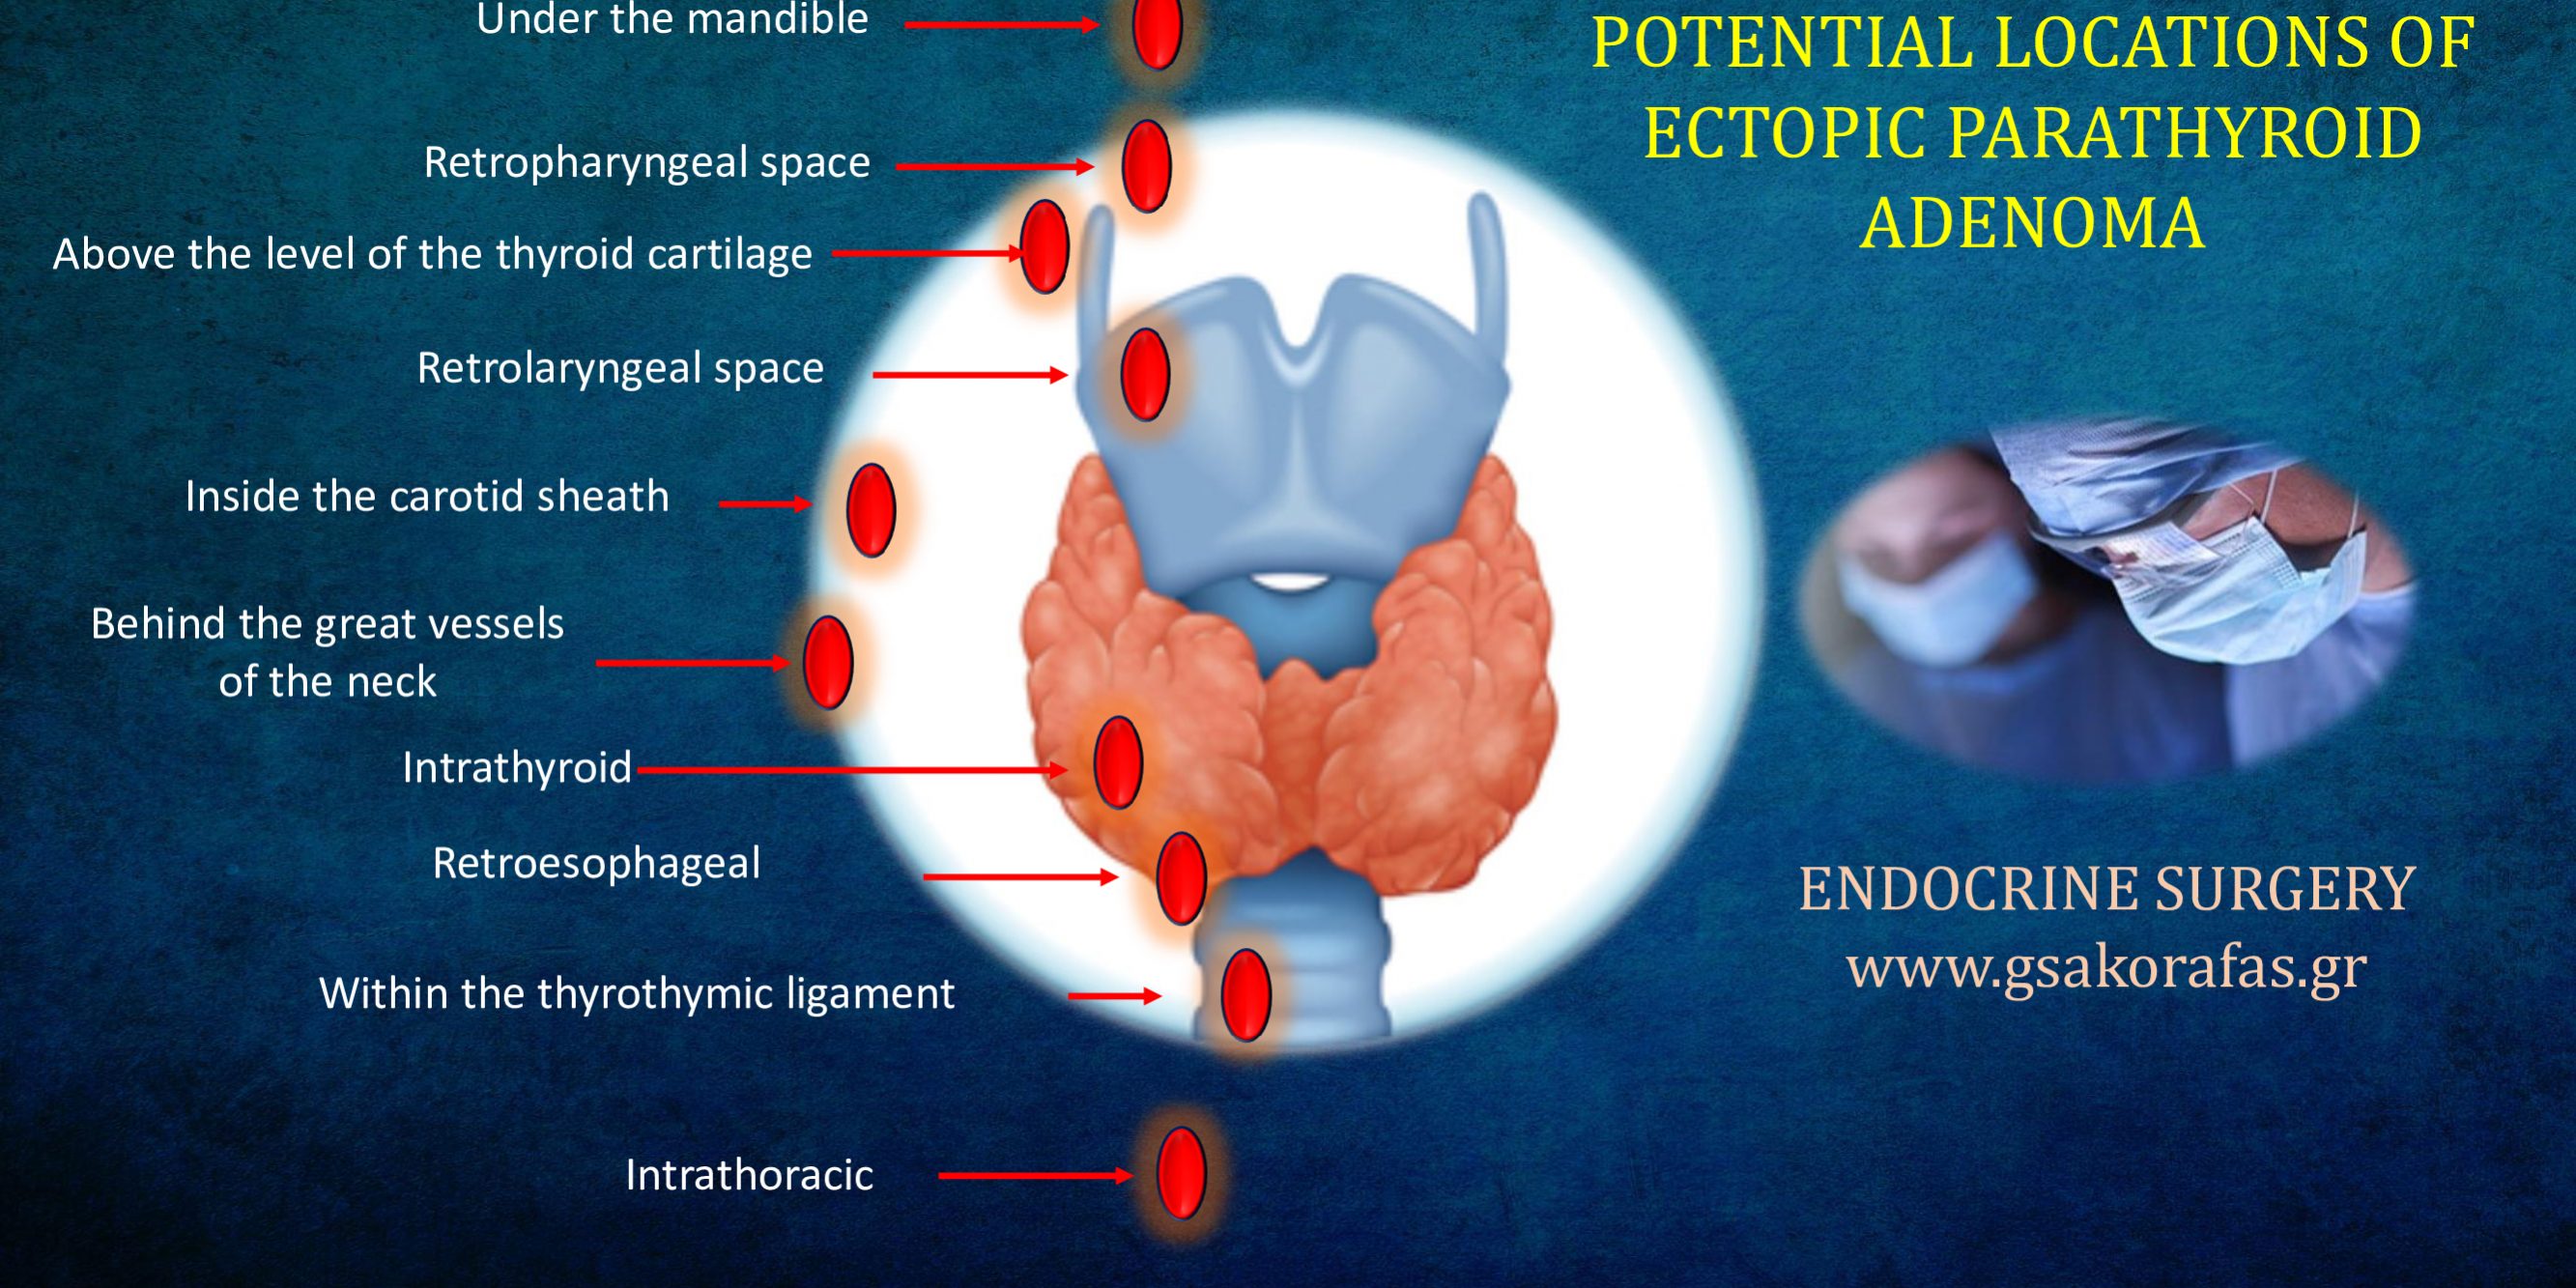 Ectopic parathyroid adenoma and embryology